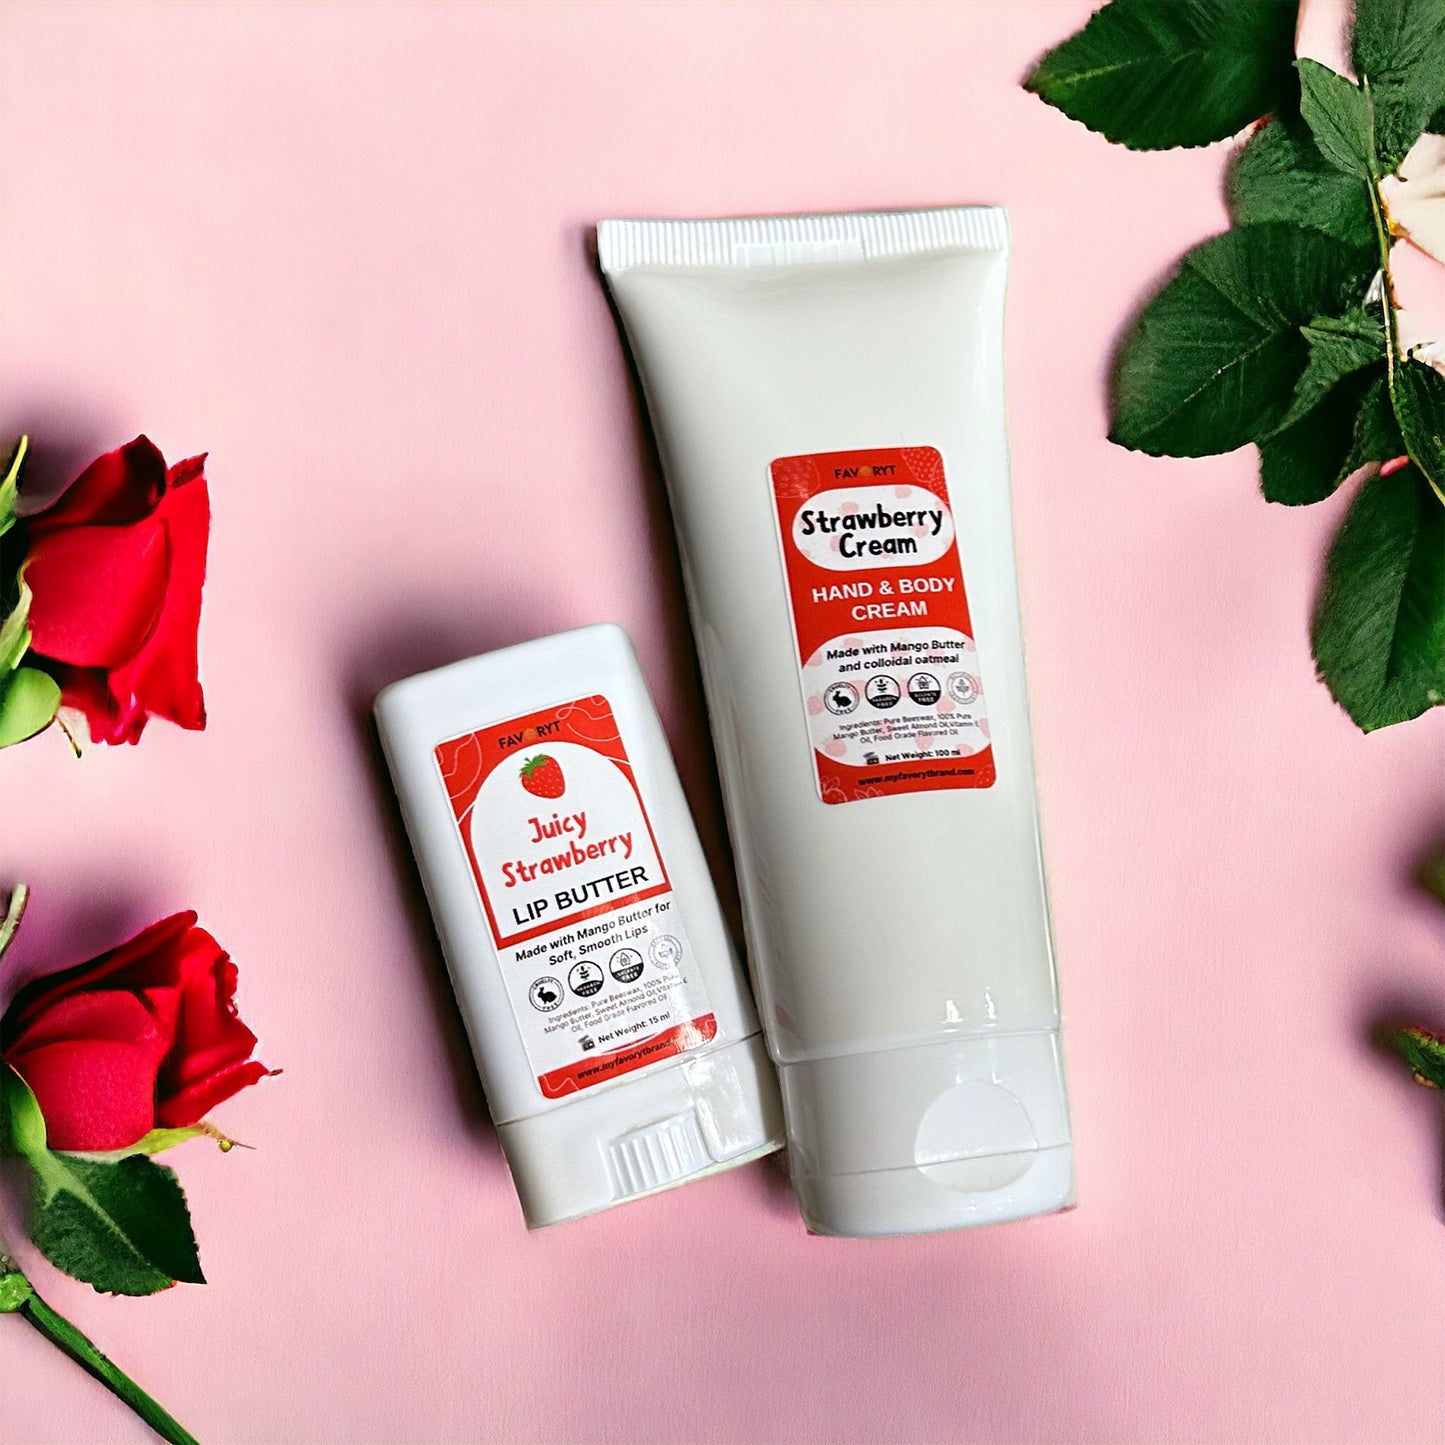 Valentine’s Bundle: Juicy Strawberry Lip Butter & Strawberry Cream Hand and Body Butter